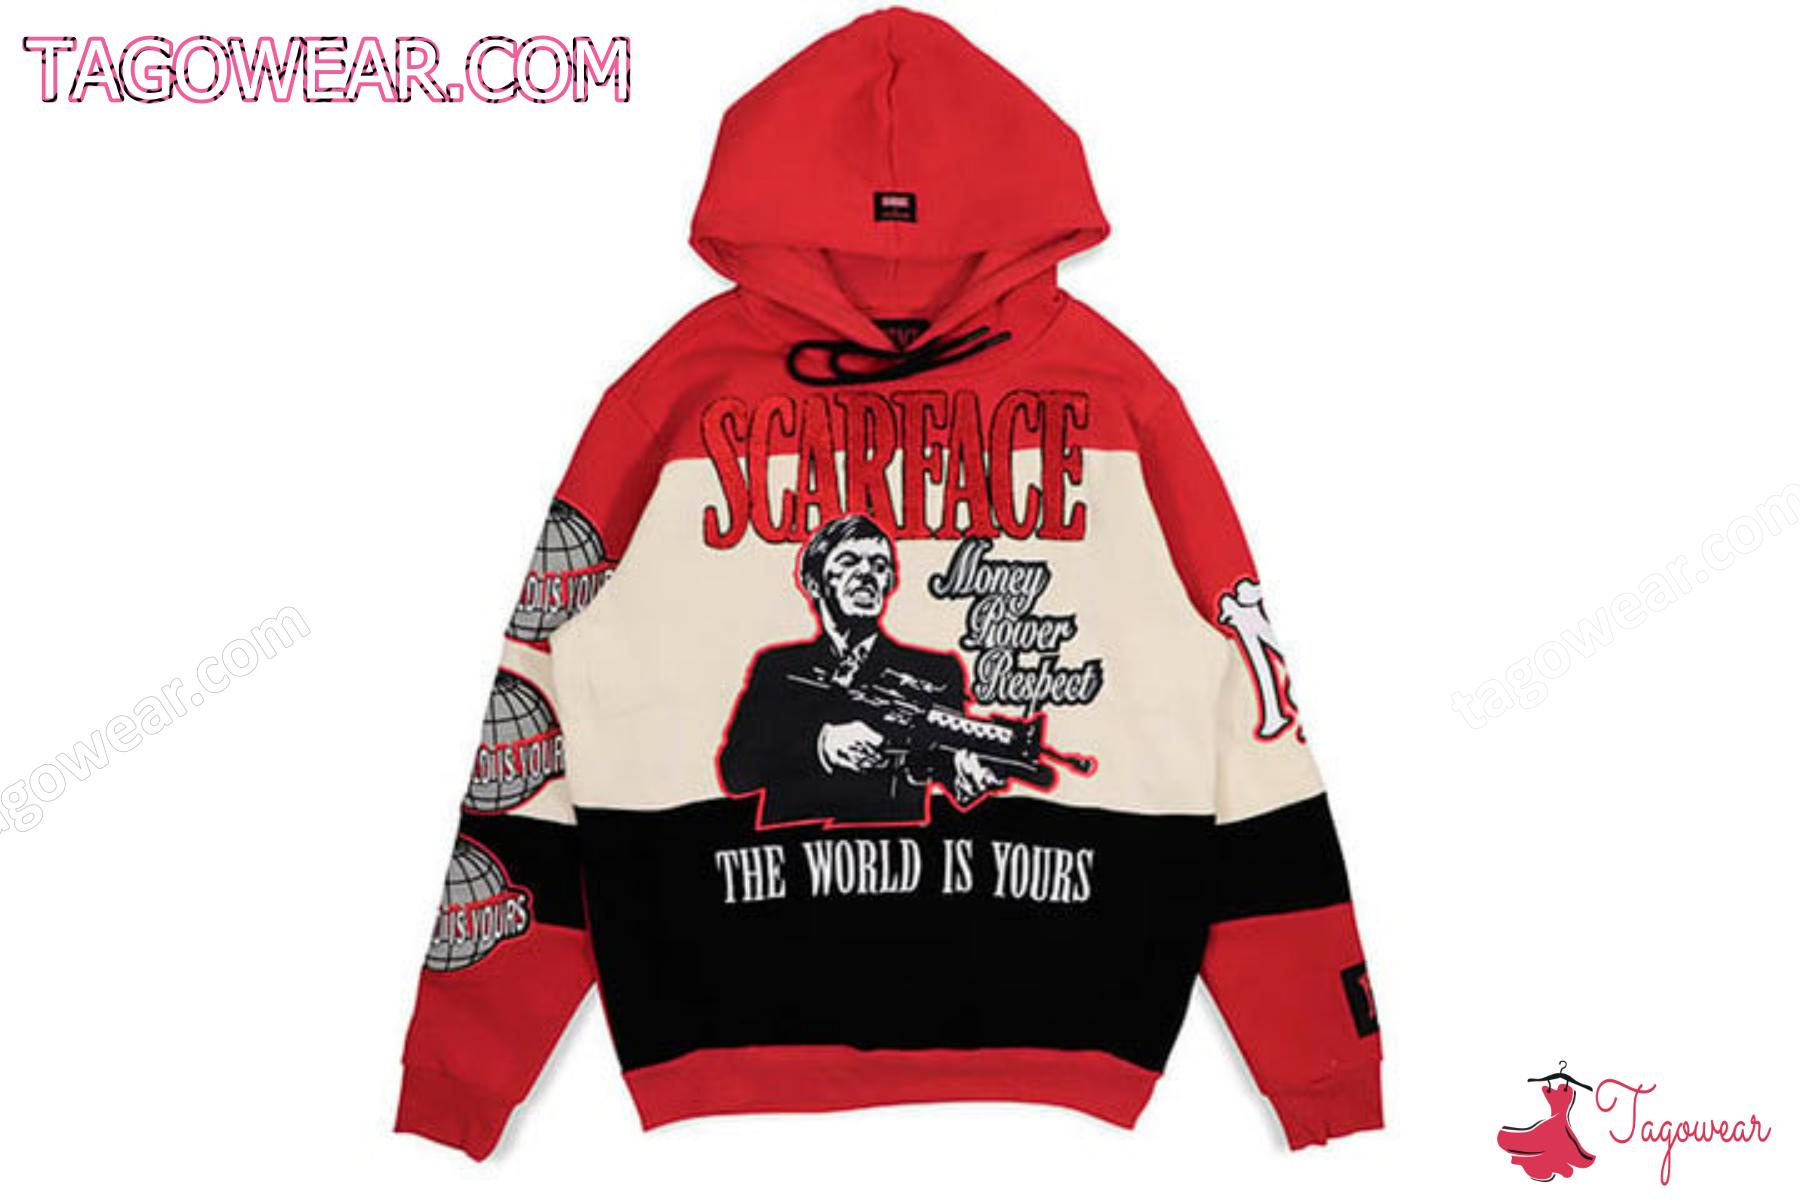 Scarface Money Power Respect The World Is Yours Hoodie